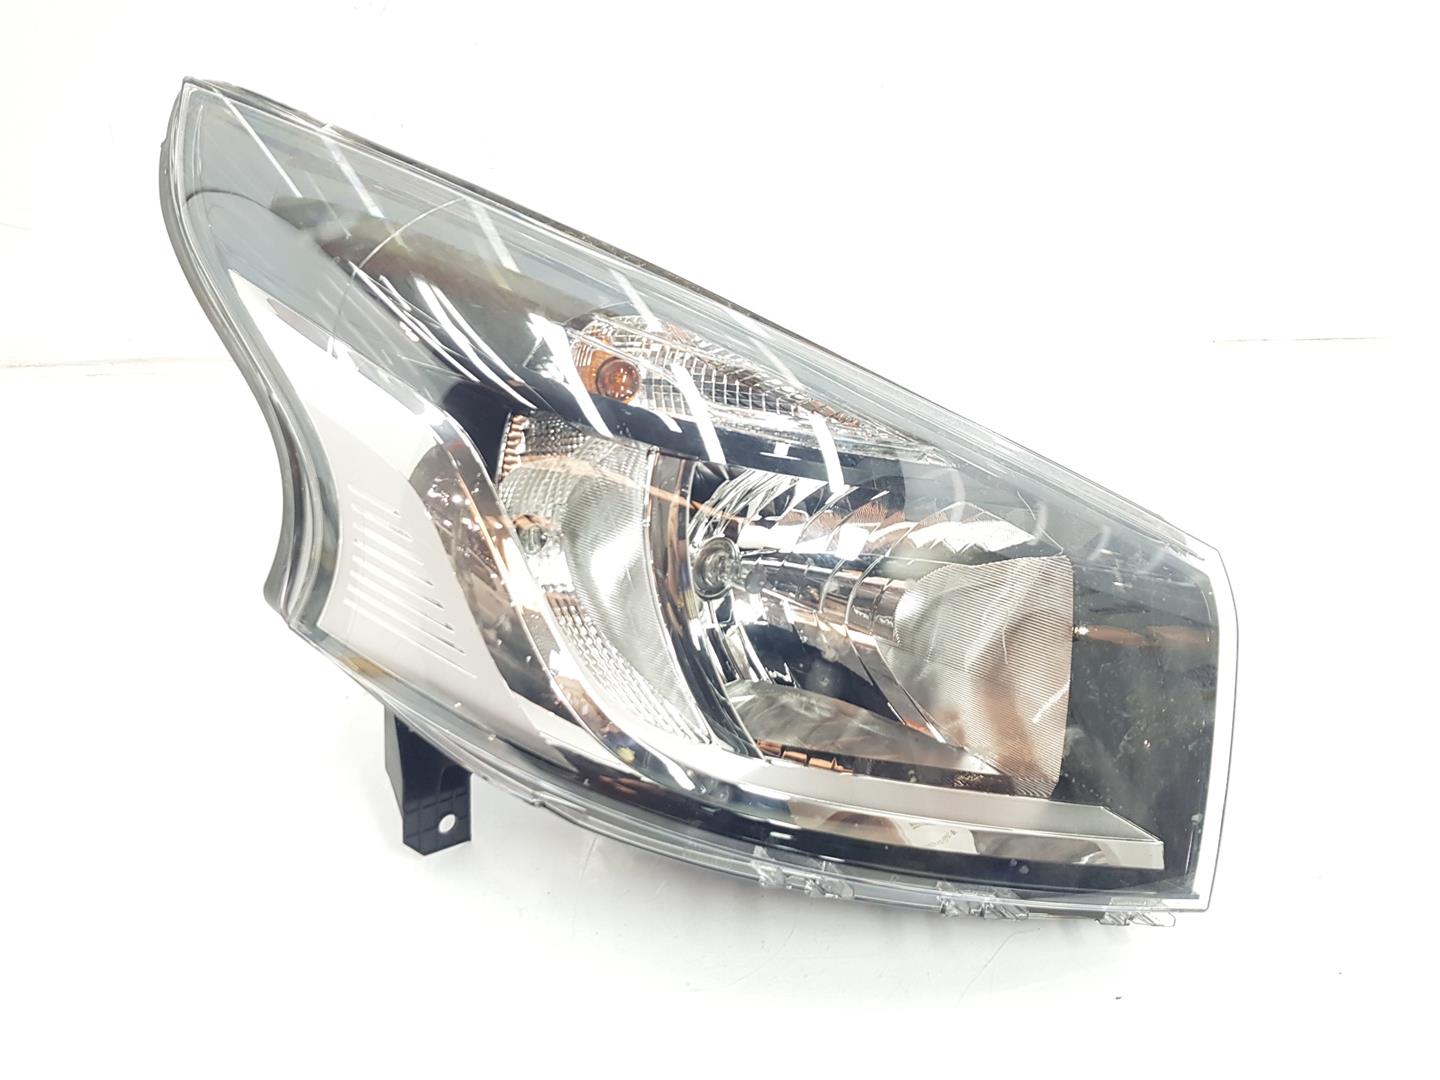 RENAULT Trafic 2 generation (2001-2015) Front Right Headlight 260109424R, 1EE011410-22, 2222DL 19890098